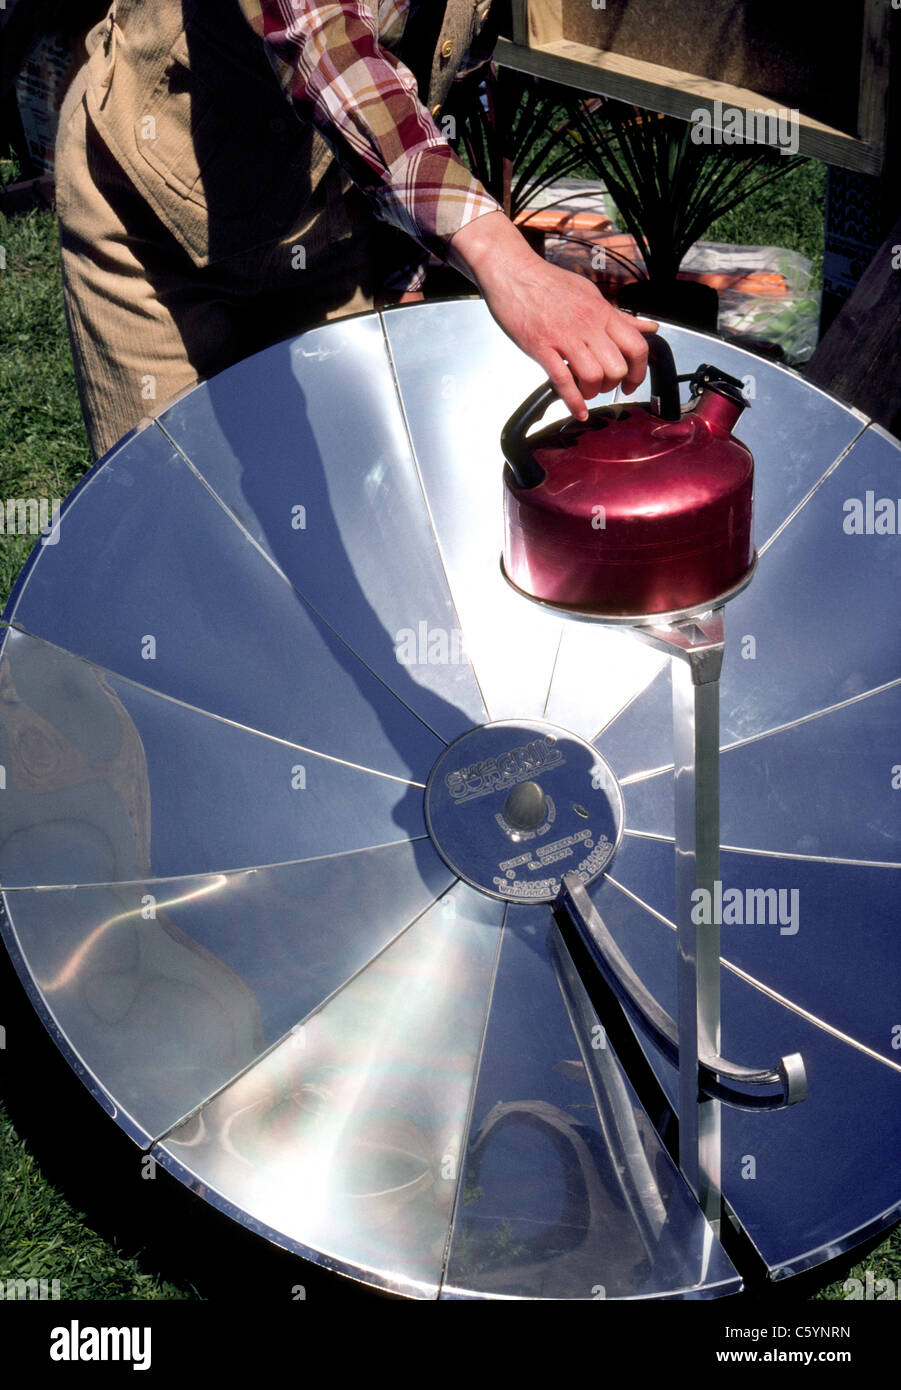 The parabolic reflector of a portable solar cooker focuses energy from the heat of the sun onto the bottom of a teakettle to boil water in New Zealand. Stock Photo